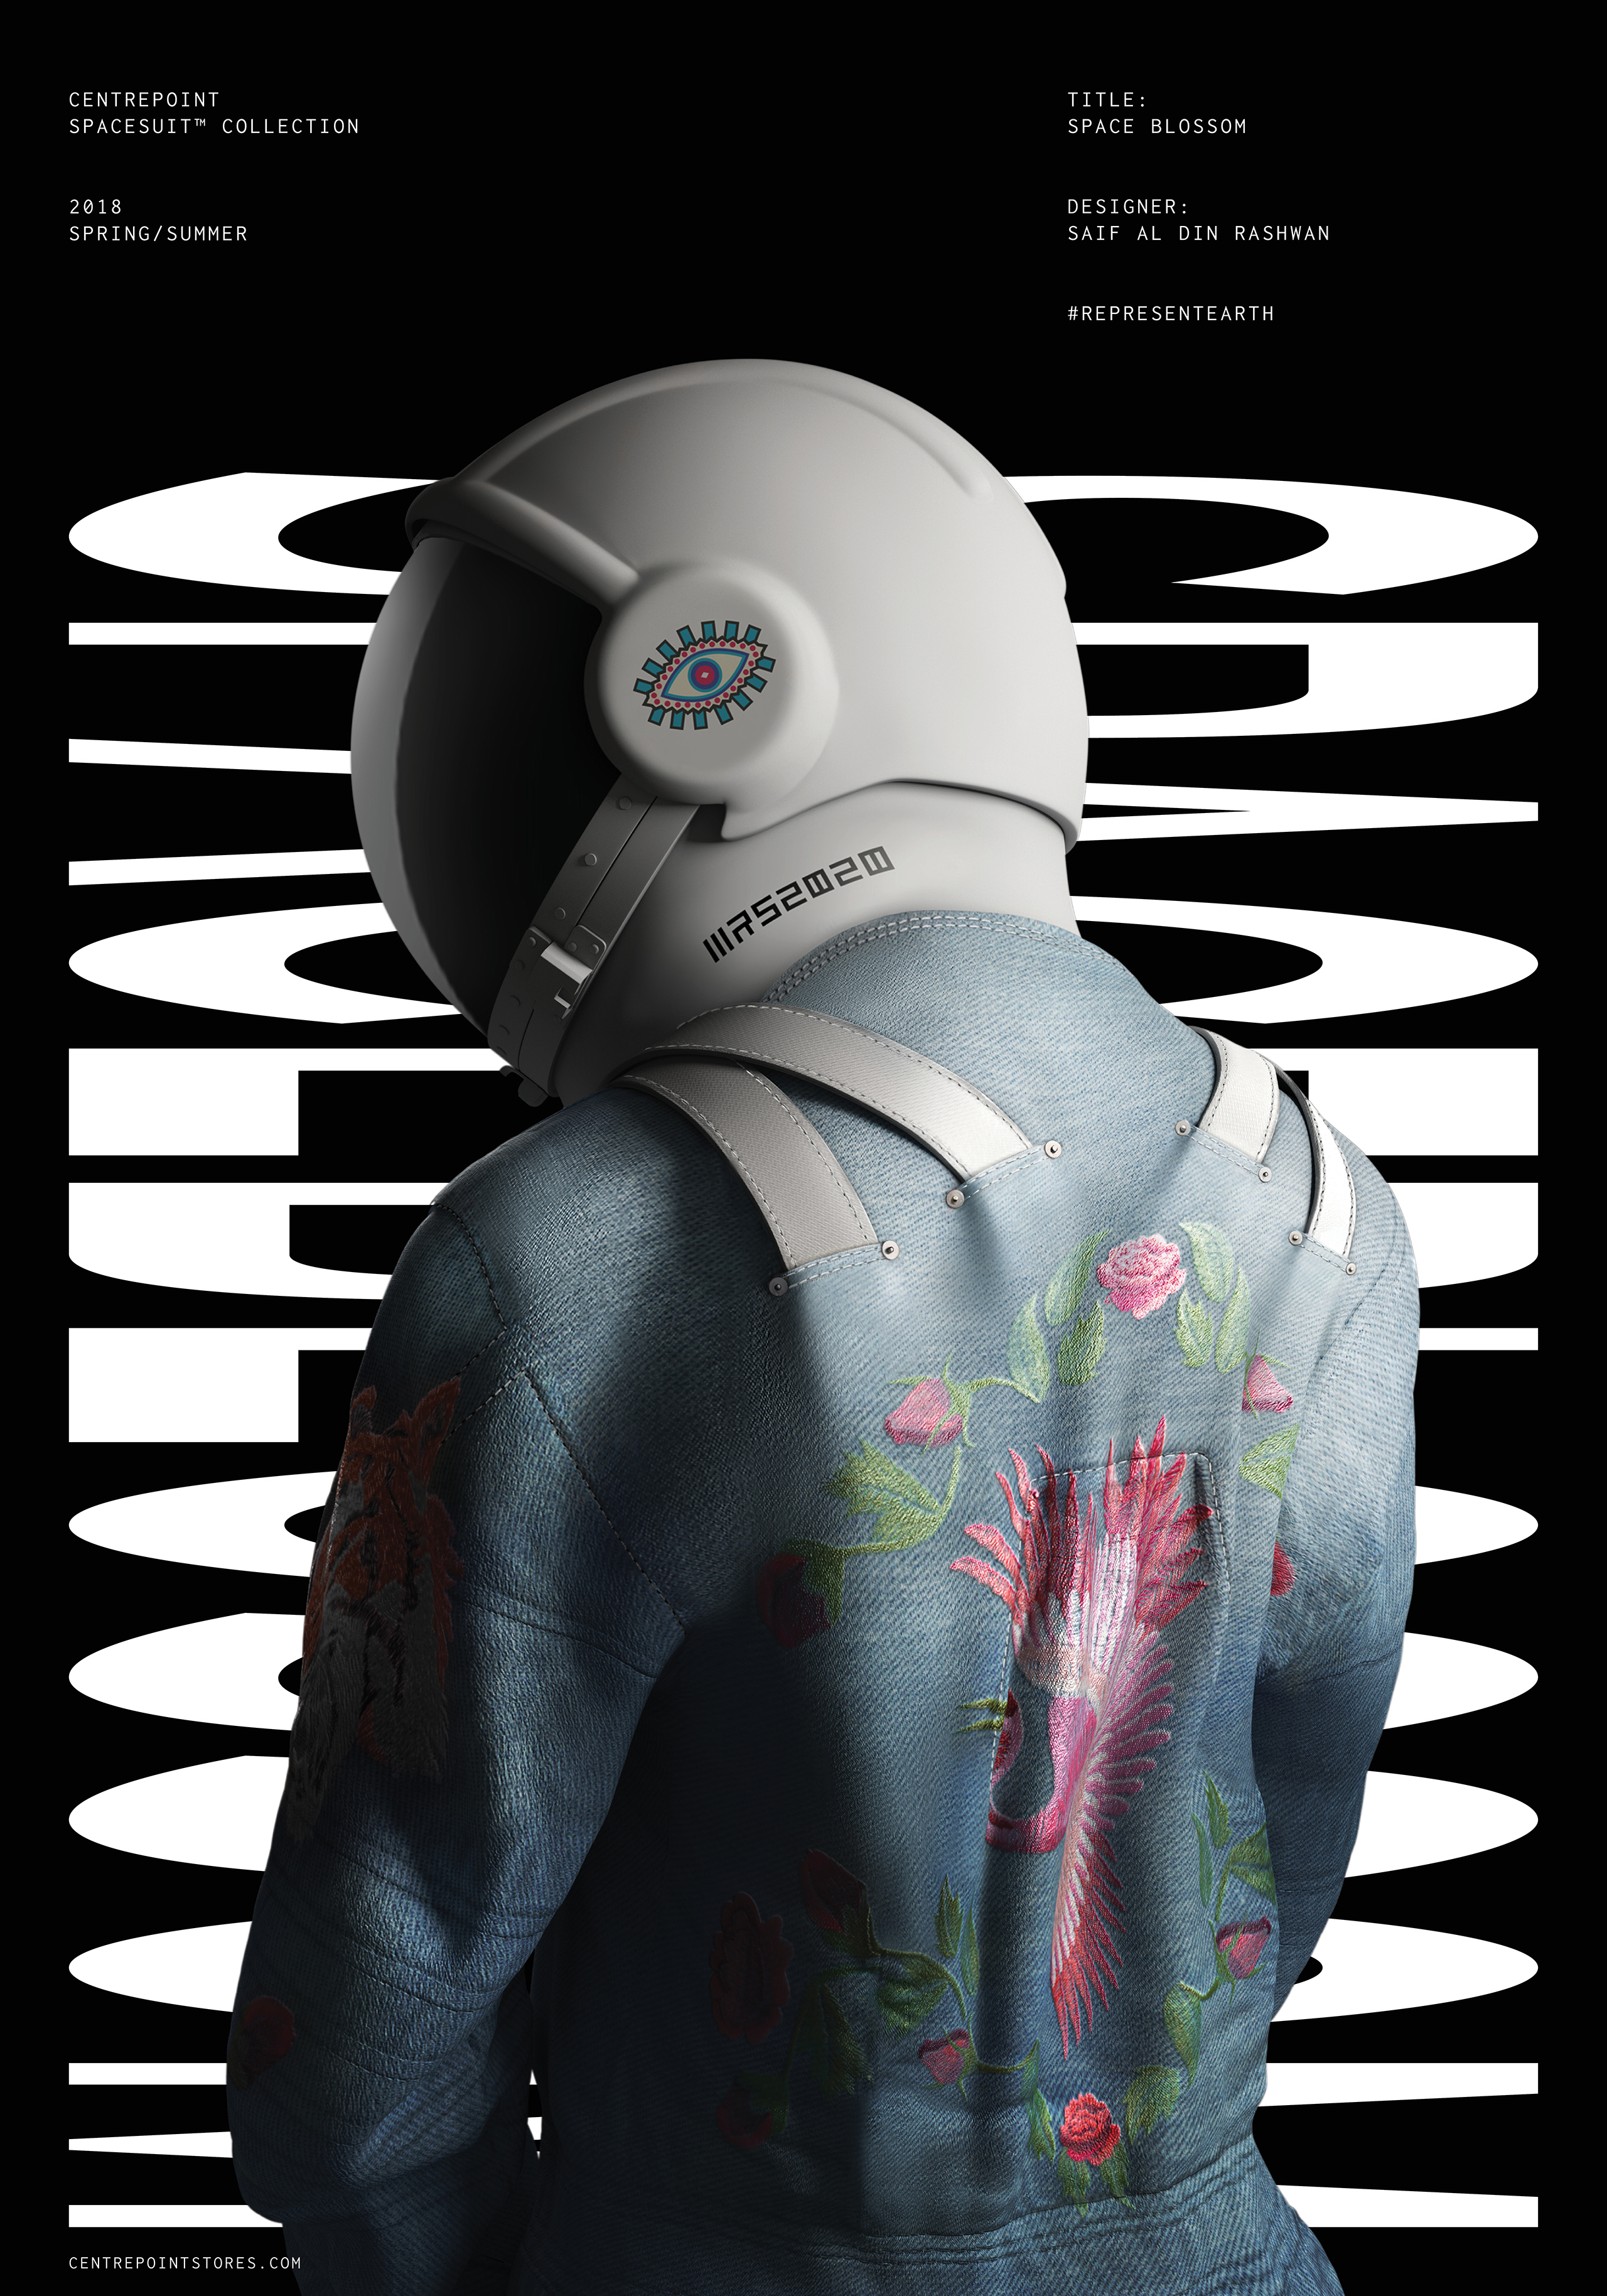 Exhibition Poster Series for Centrepoint Spacesuit Collection 18